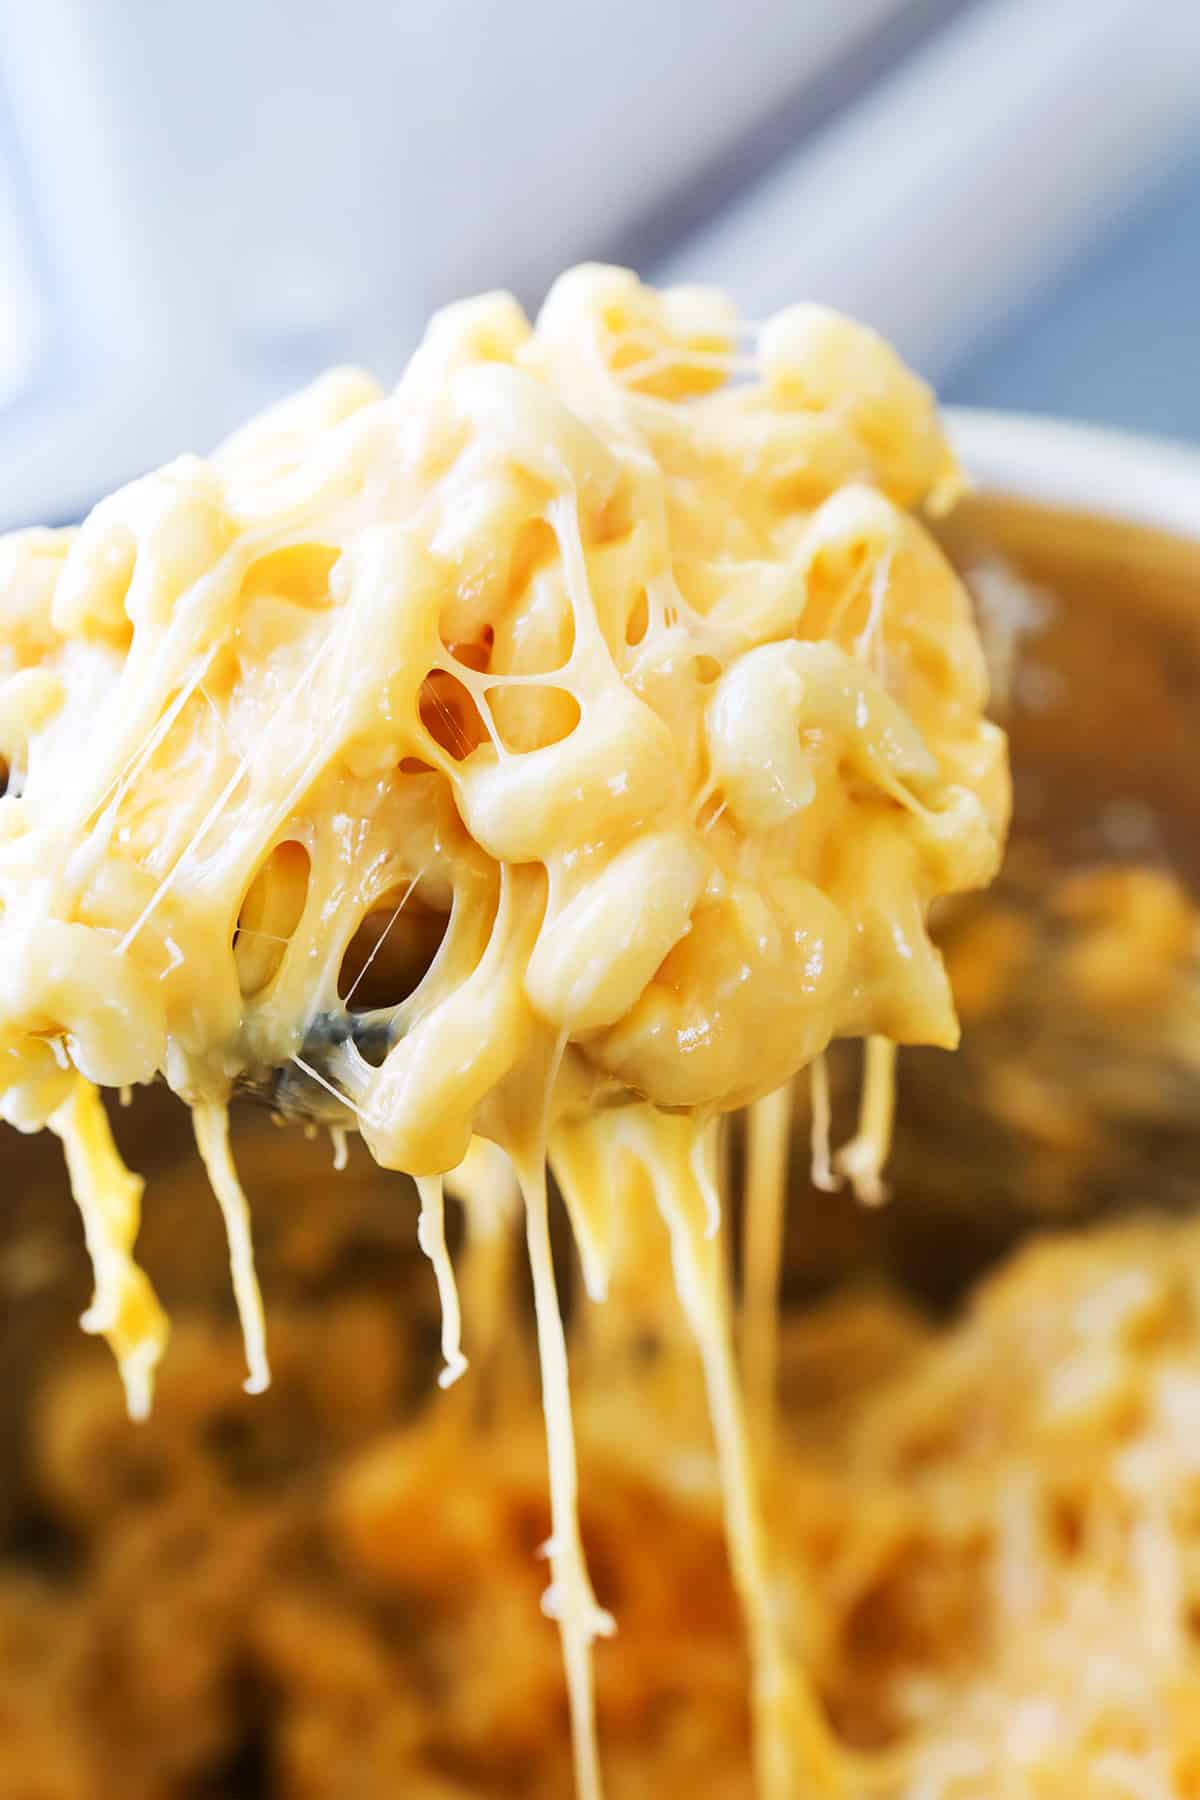 Ooey gooey cheesy spoonful of mac and cheese being lifted from a pan.